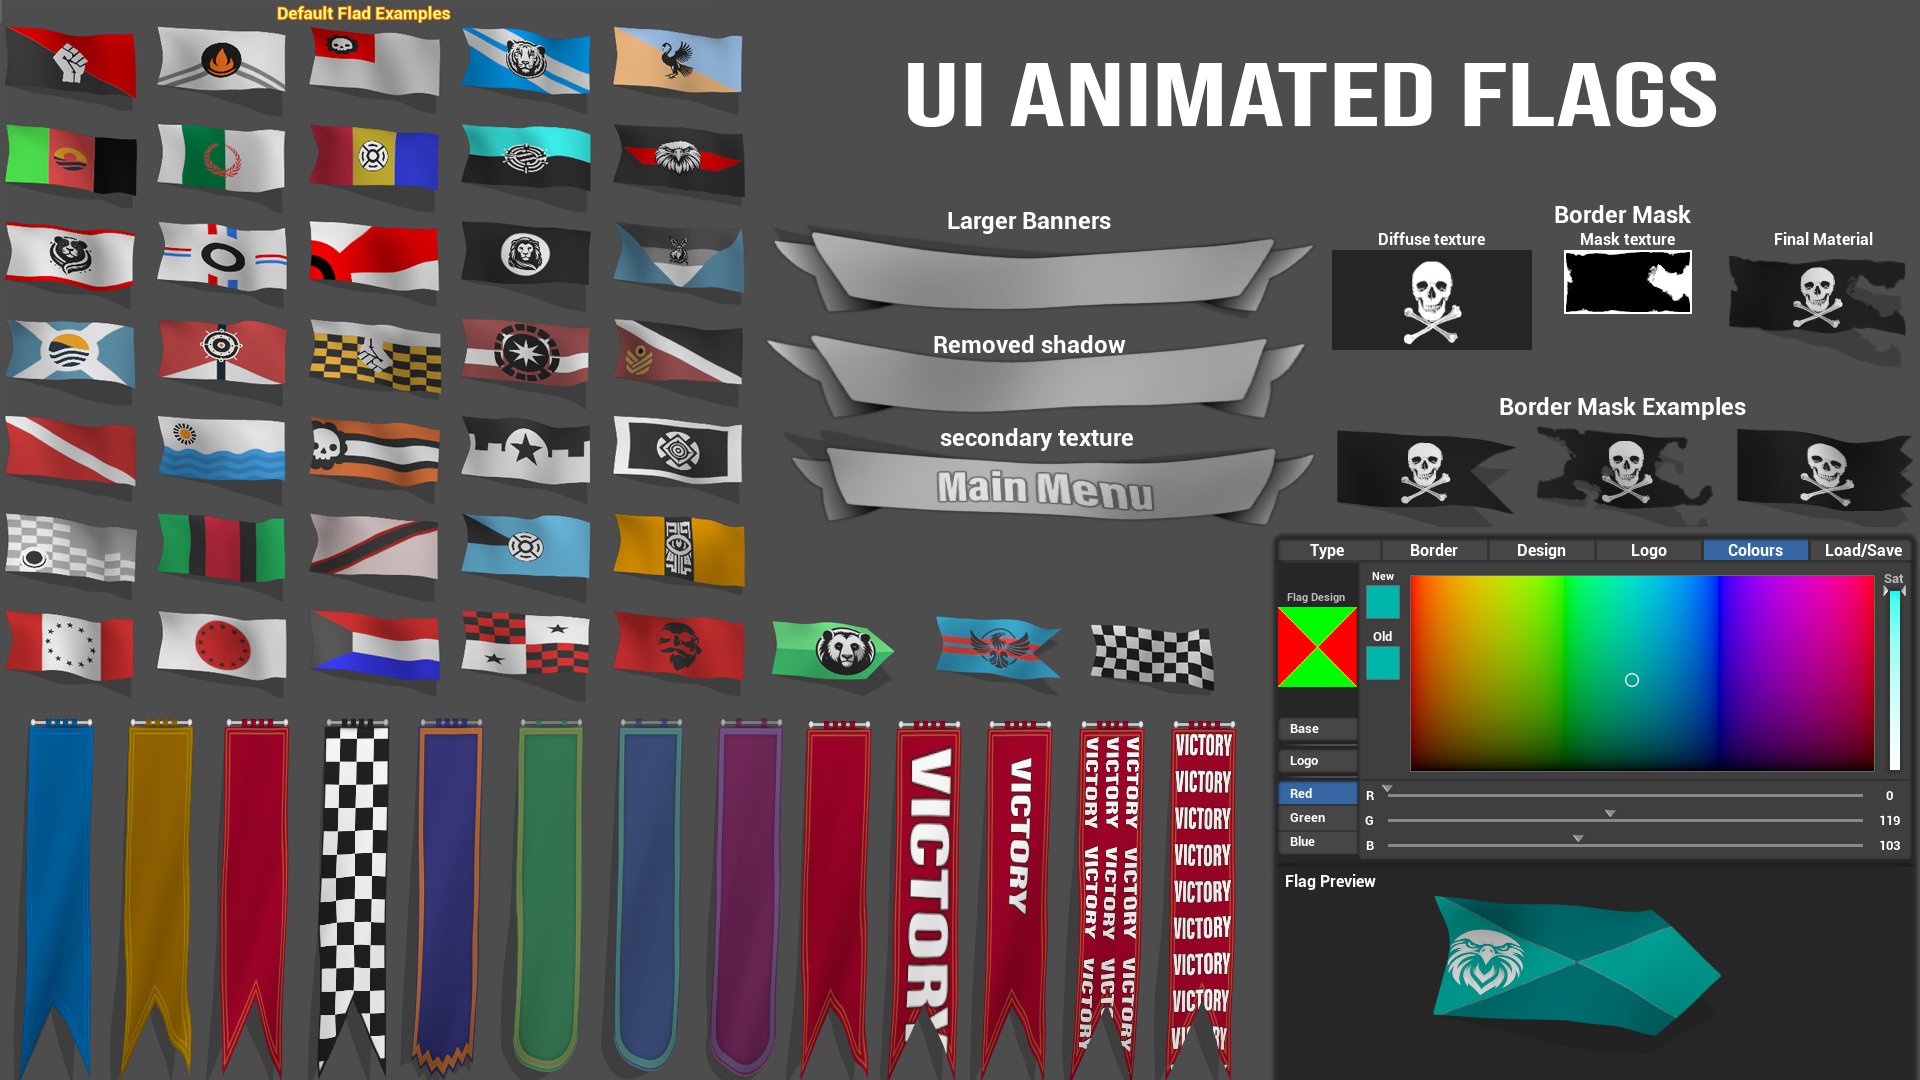 UI_Animated_Flags-Featured Gallery1.jpg